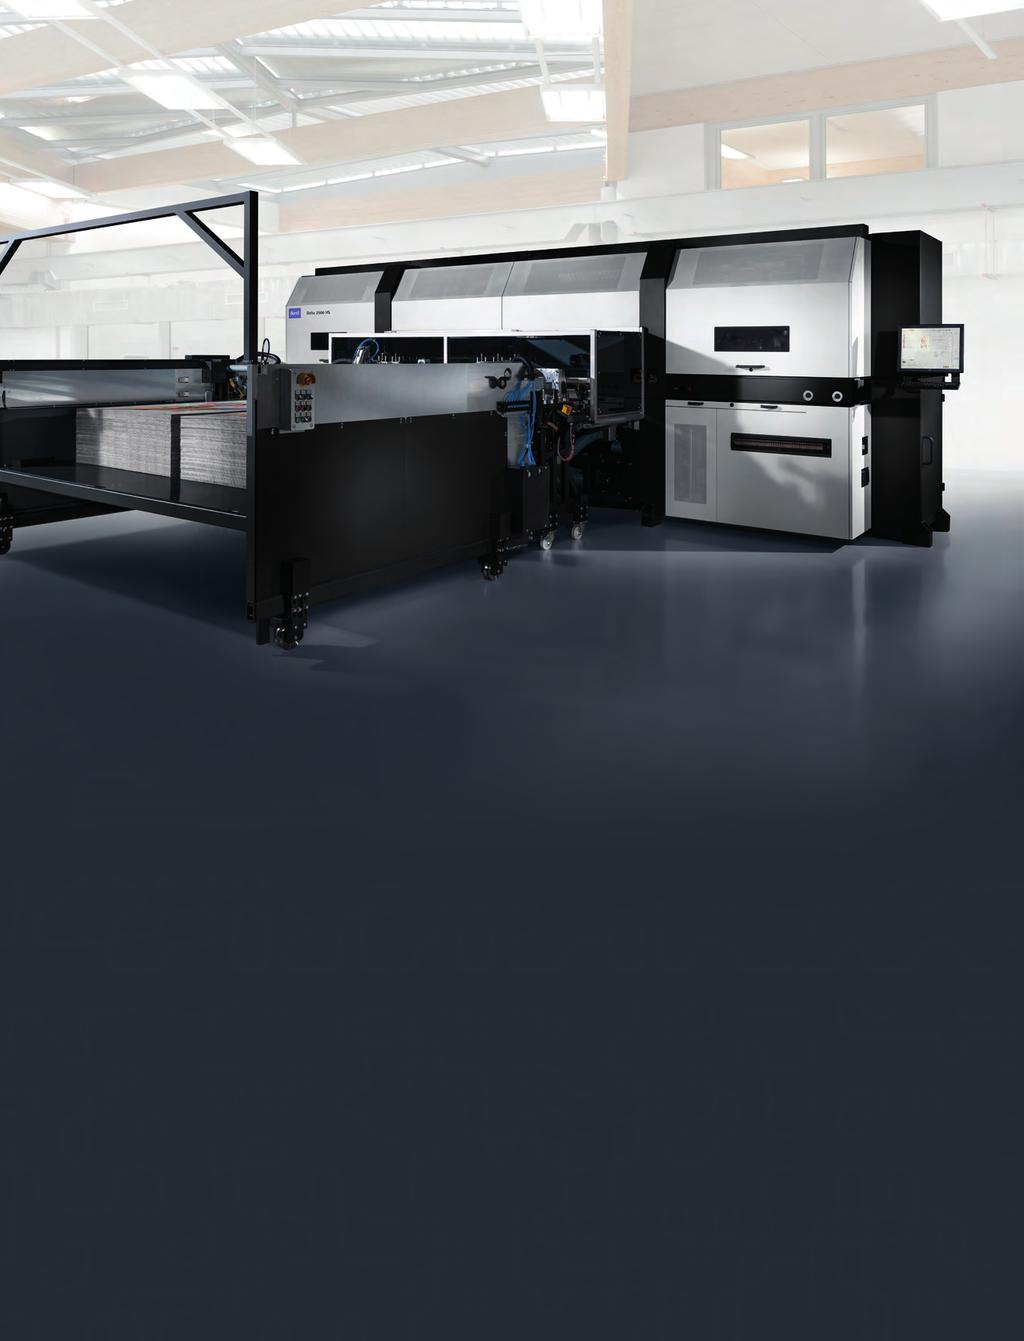 Delta 2500 Delta 2500 HS The Delta 2500 and the Delta 2500 HS are the flagships of the Delta UV flatbed printer portfolio with Multi-Pass technology.